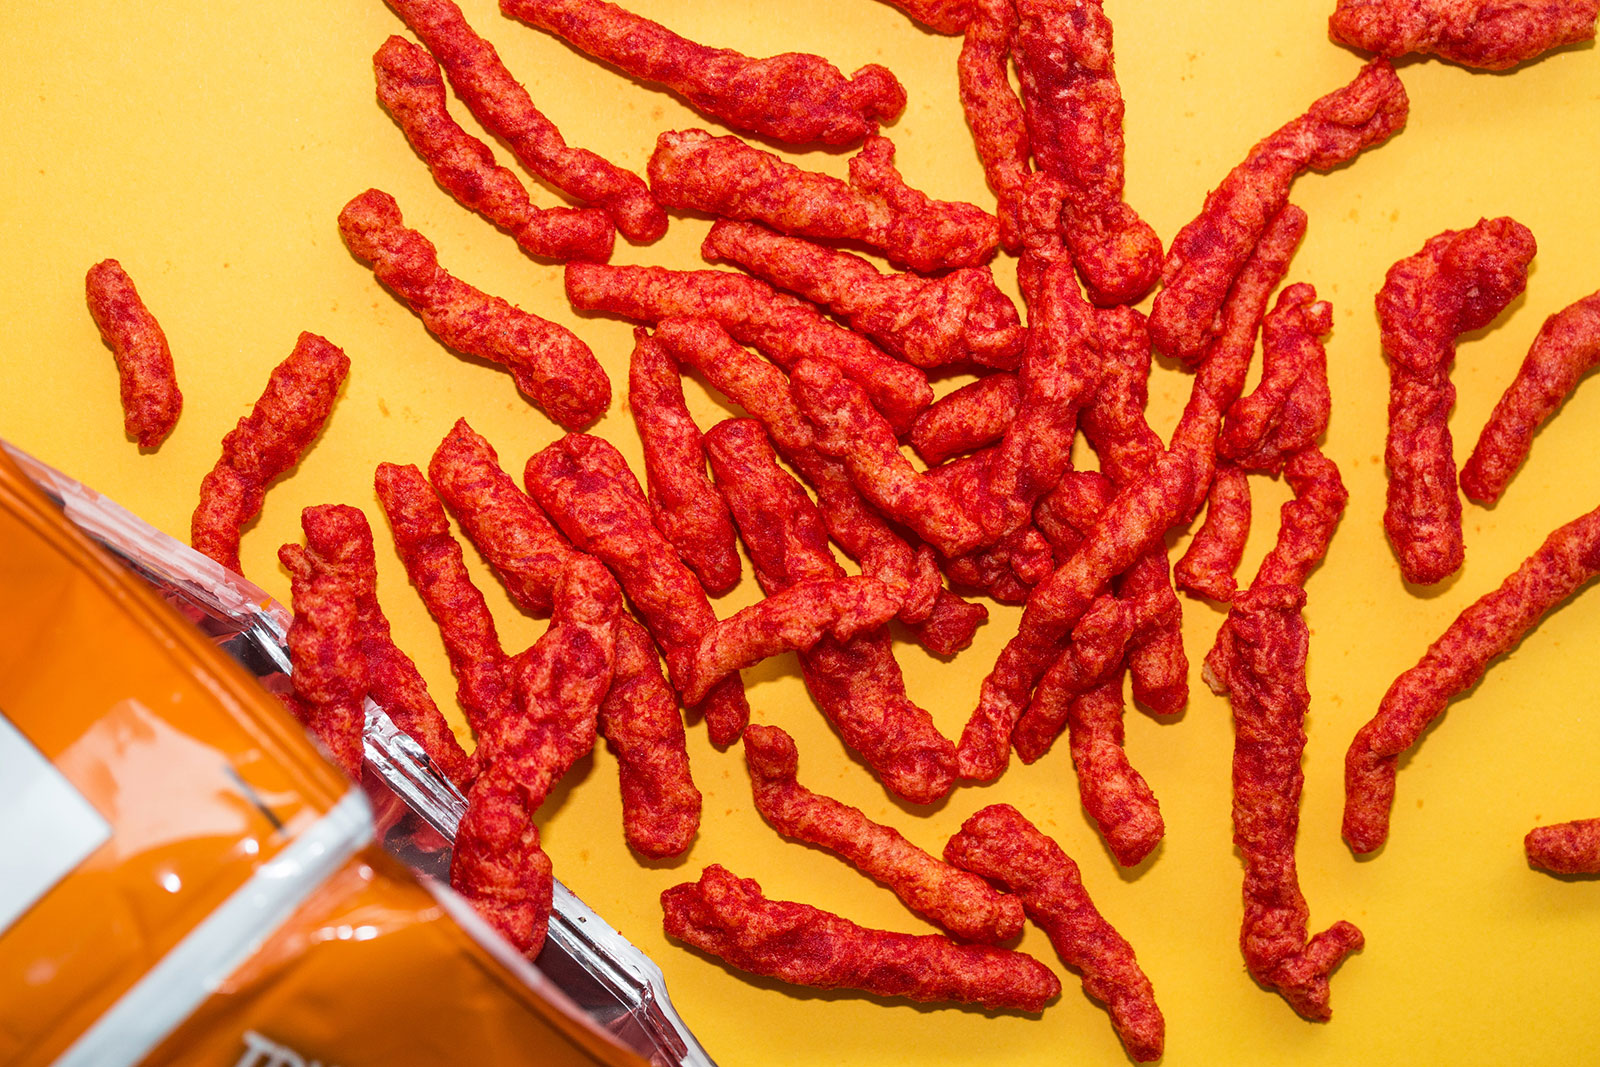 🌶 Only a Person Who Can Handle the Heat Will Have Eaten 13/25 of These Spicy Foods Flamin' Hot Cheetos